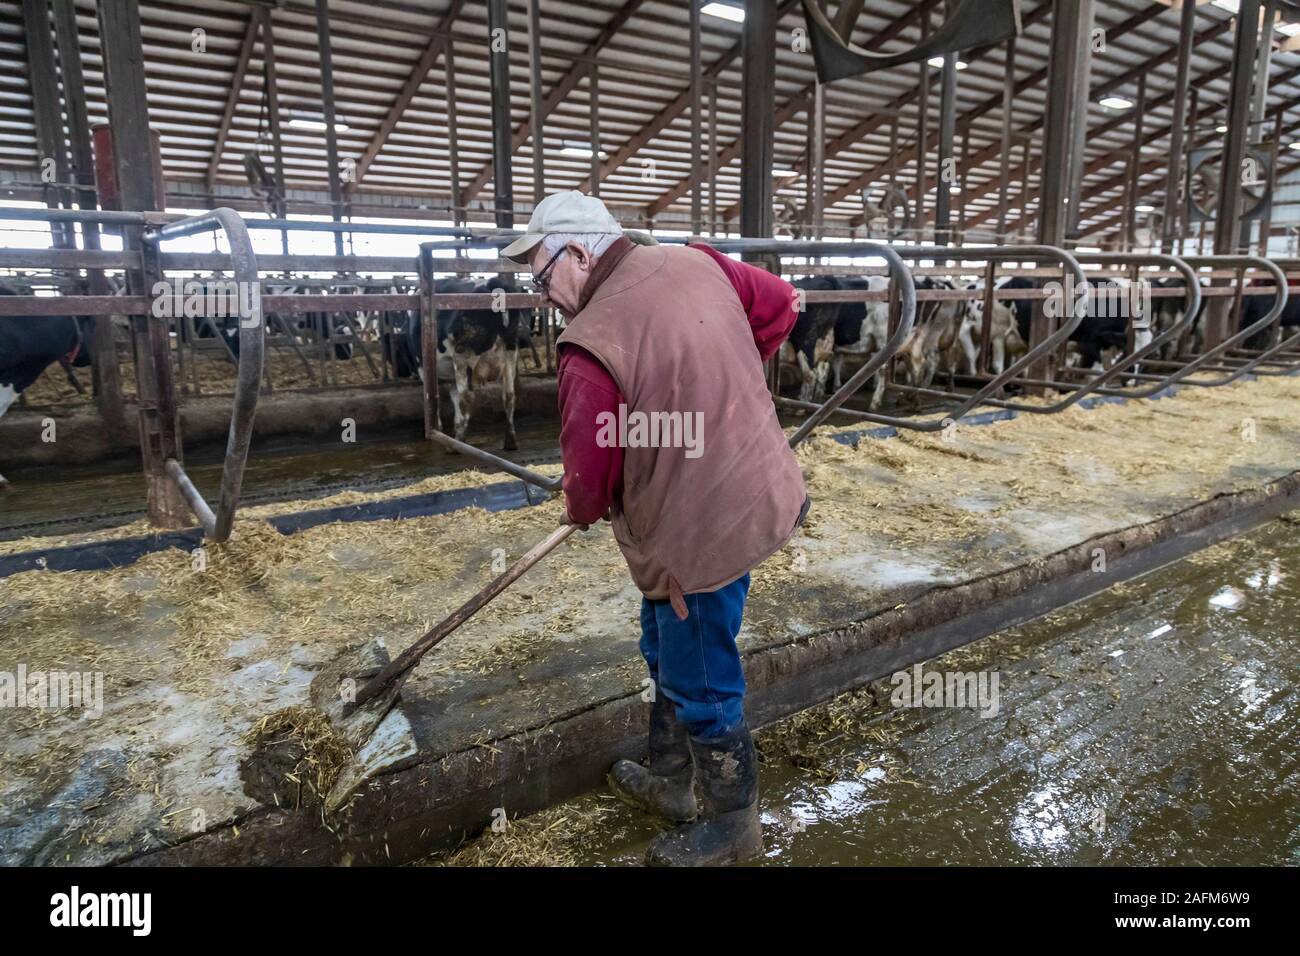 Omro, Wisconsin - Pete Knigge cleans the cattle barn at Knigge Farms, a dairy farm with automated milking machines. Stock Photo